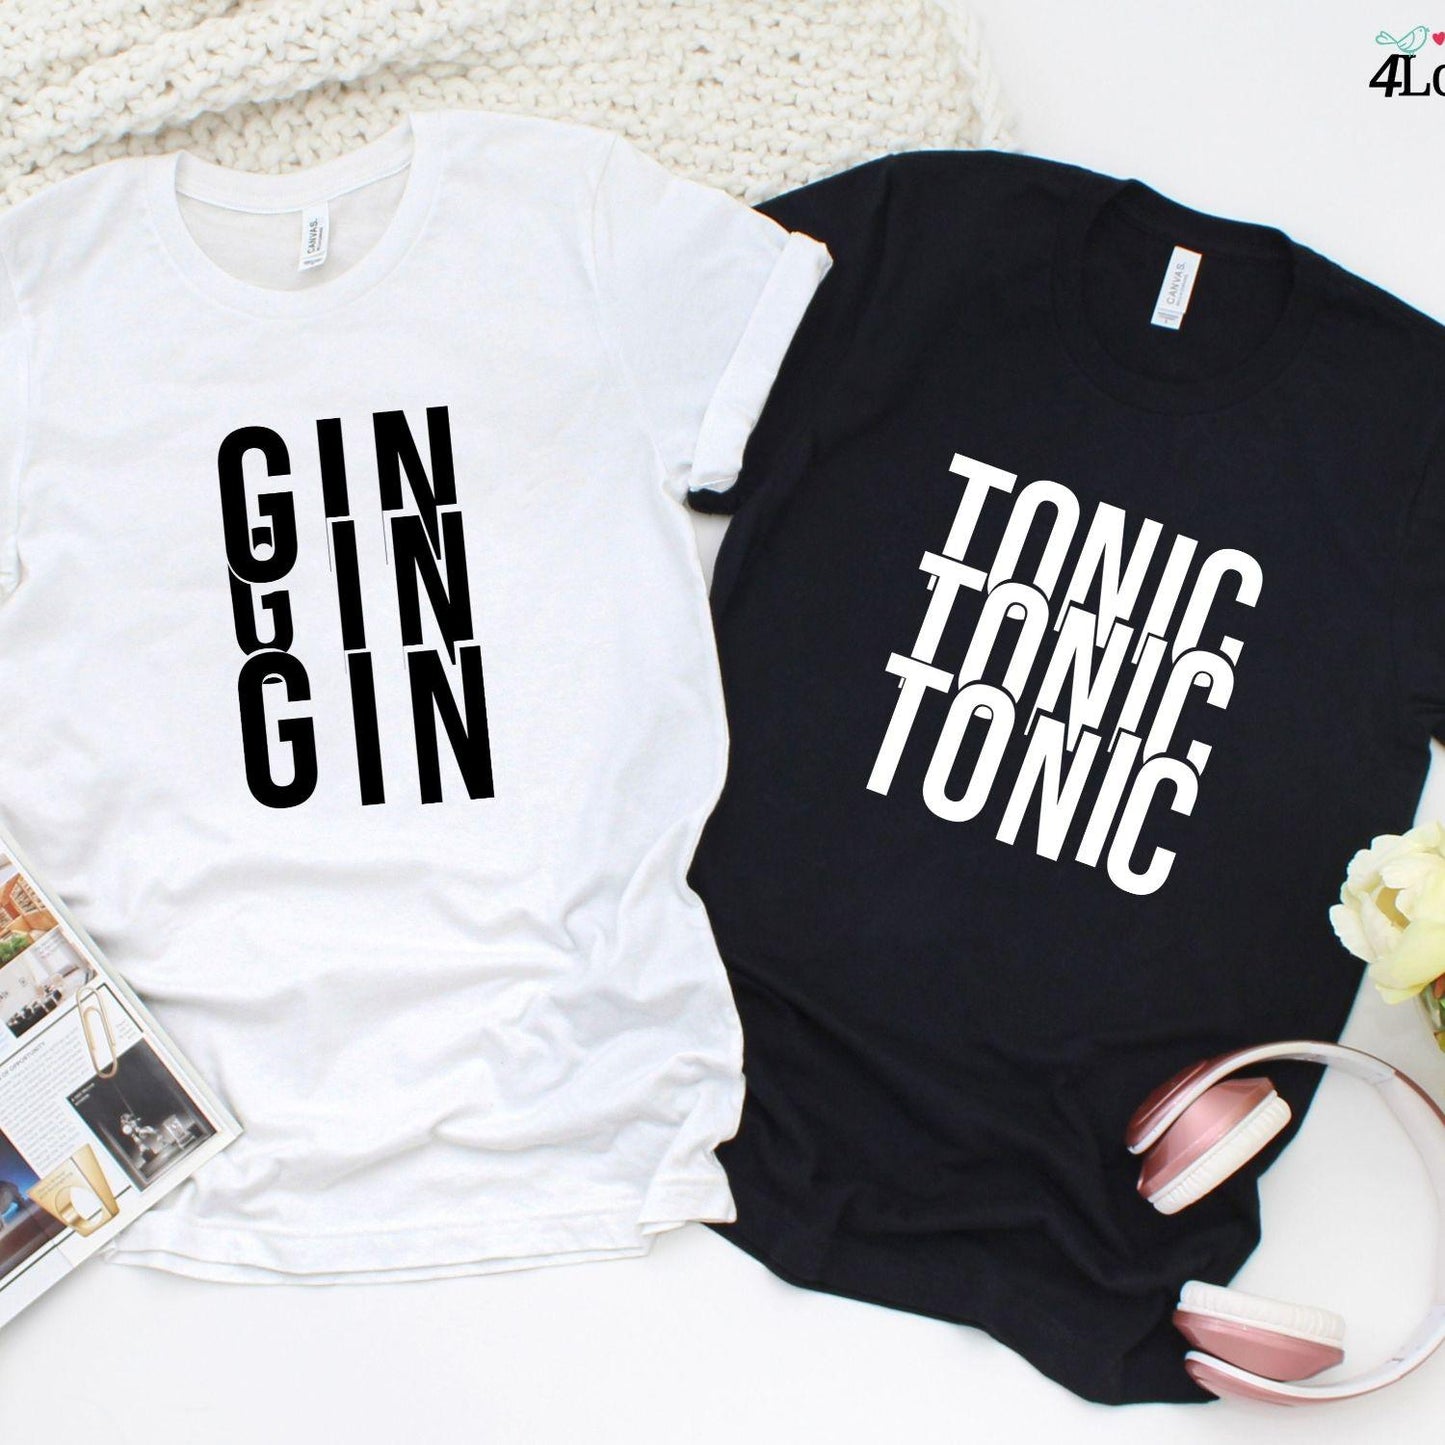 Couples & Besties Fun Matching Outfits: Gin-Tonic | Ideal BFF Presents & Couple Treats - 4Lovebirds